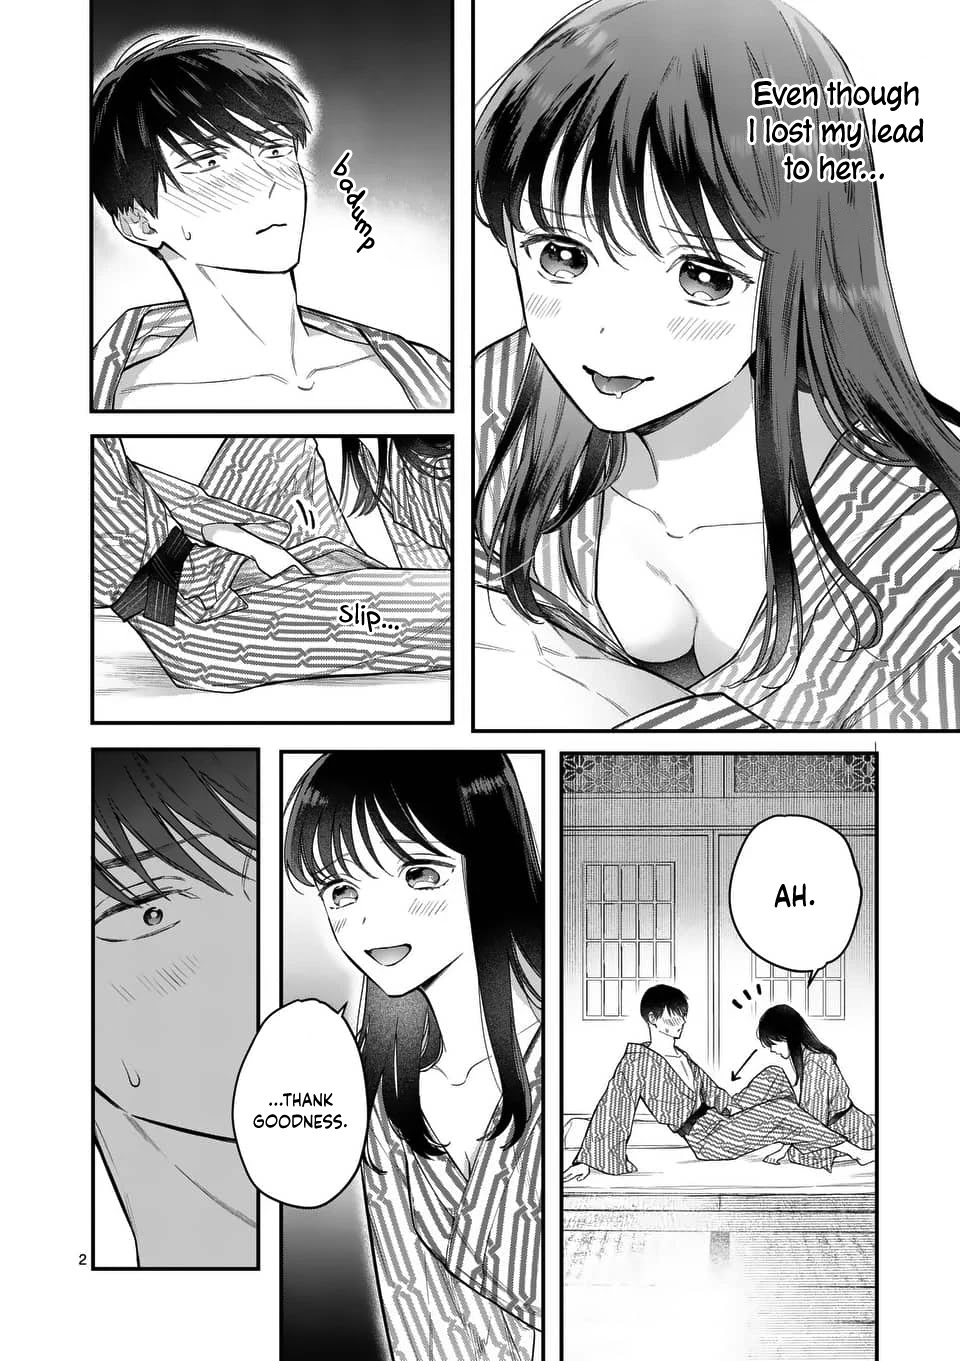 Is It Wrong To Get Done By A Girl? Chapter 5: The Staycation (3) - Picture 2